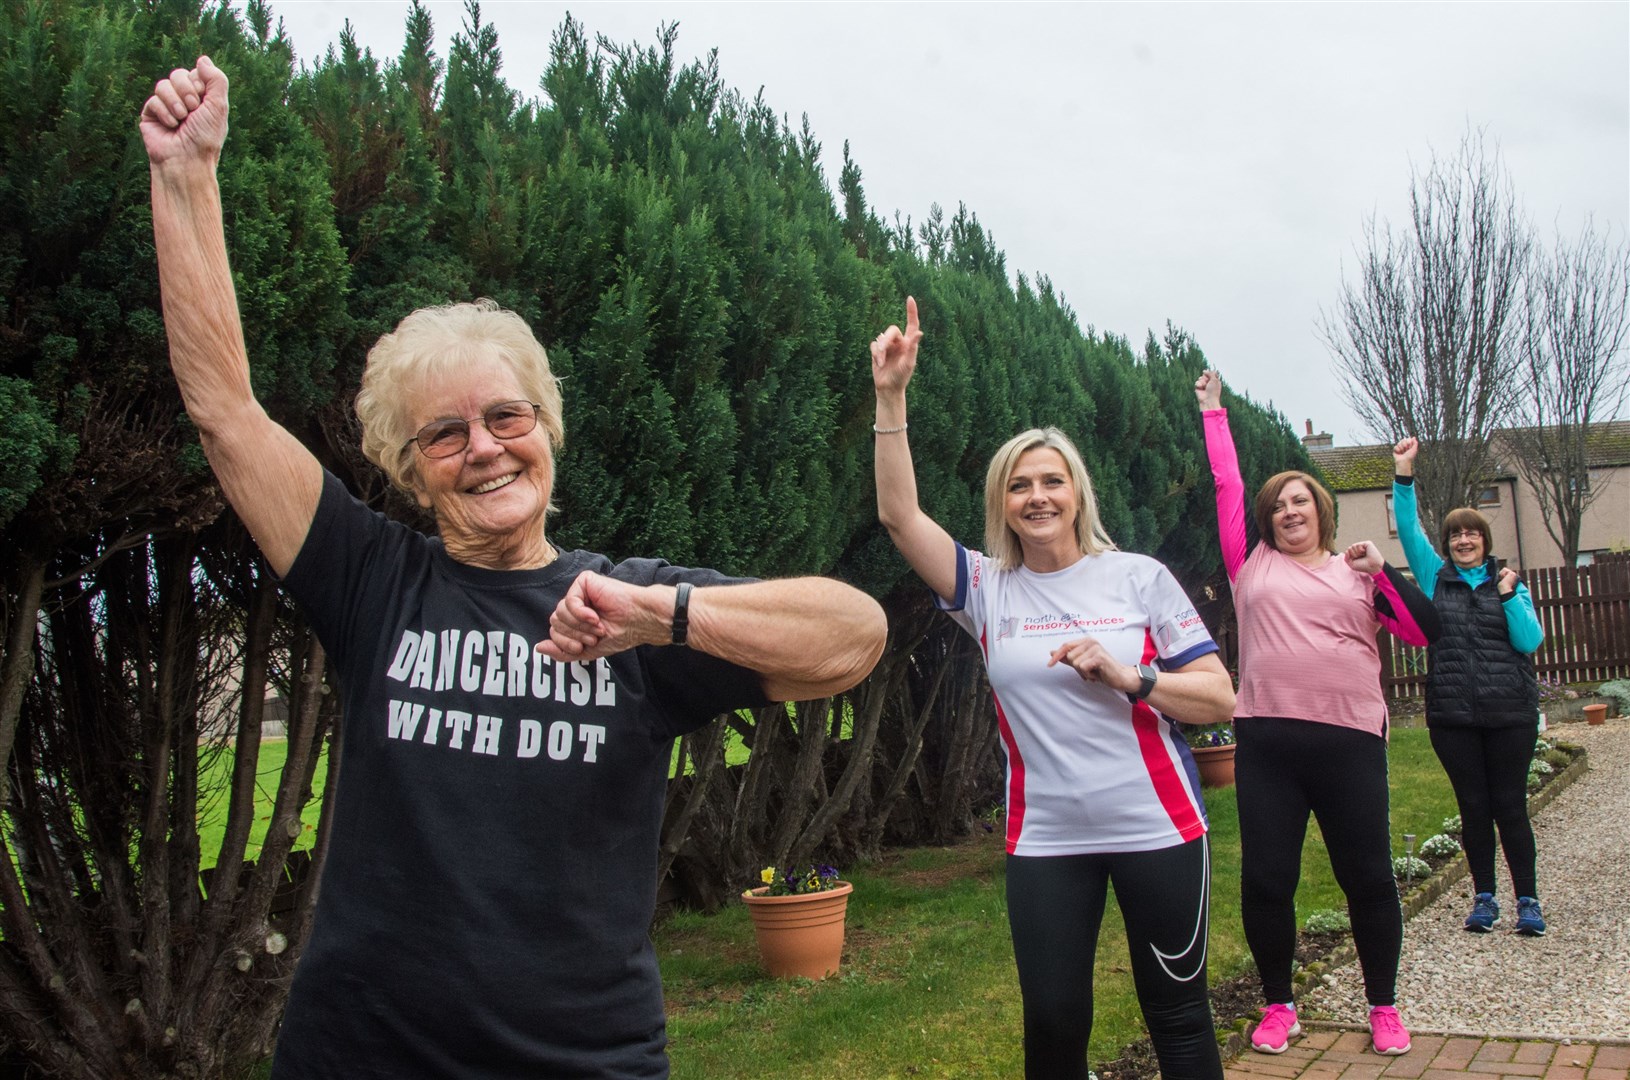 Dot Bremner (Left) from Dancercise with Dot along with Ann Hay (third left and Phyllis Campbell (right) are raising money for North East Sensory Services by dancing everyday in November. ..Today they were joined by Community Fundraiser Co-ordinator Lynn Batham from NESS. (second left)...Picture: Becky Saunderson..